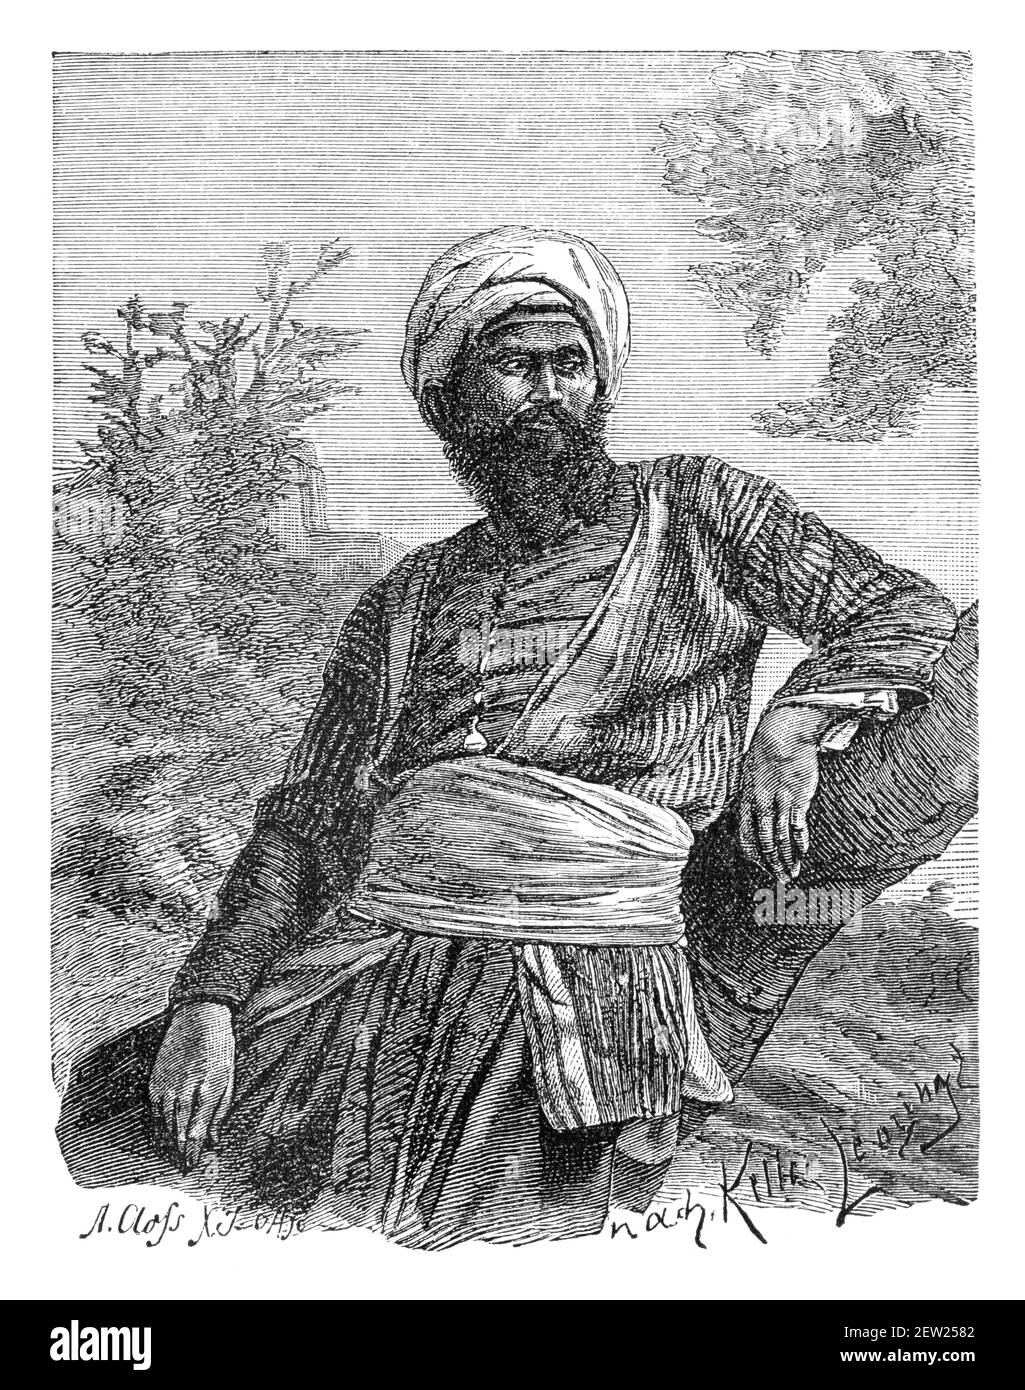 Arab sheikh or nobleman. Culture and history of North Africa. Vintage antique black and white illustration. 19th century. Stock Photo